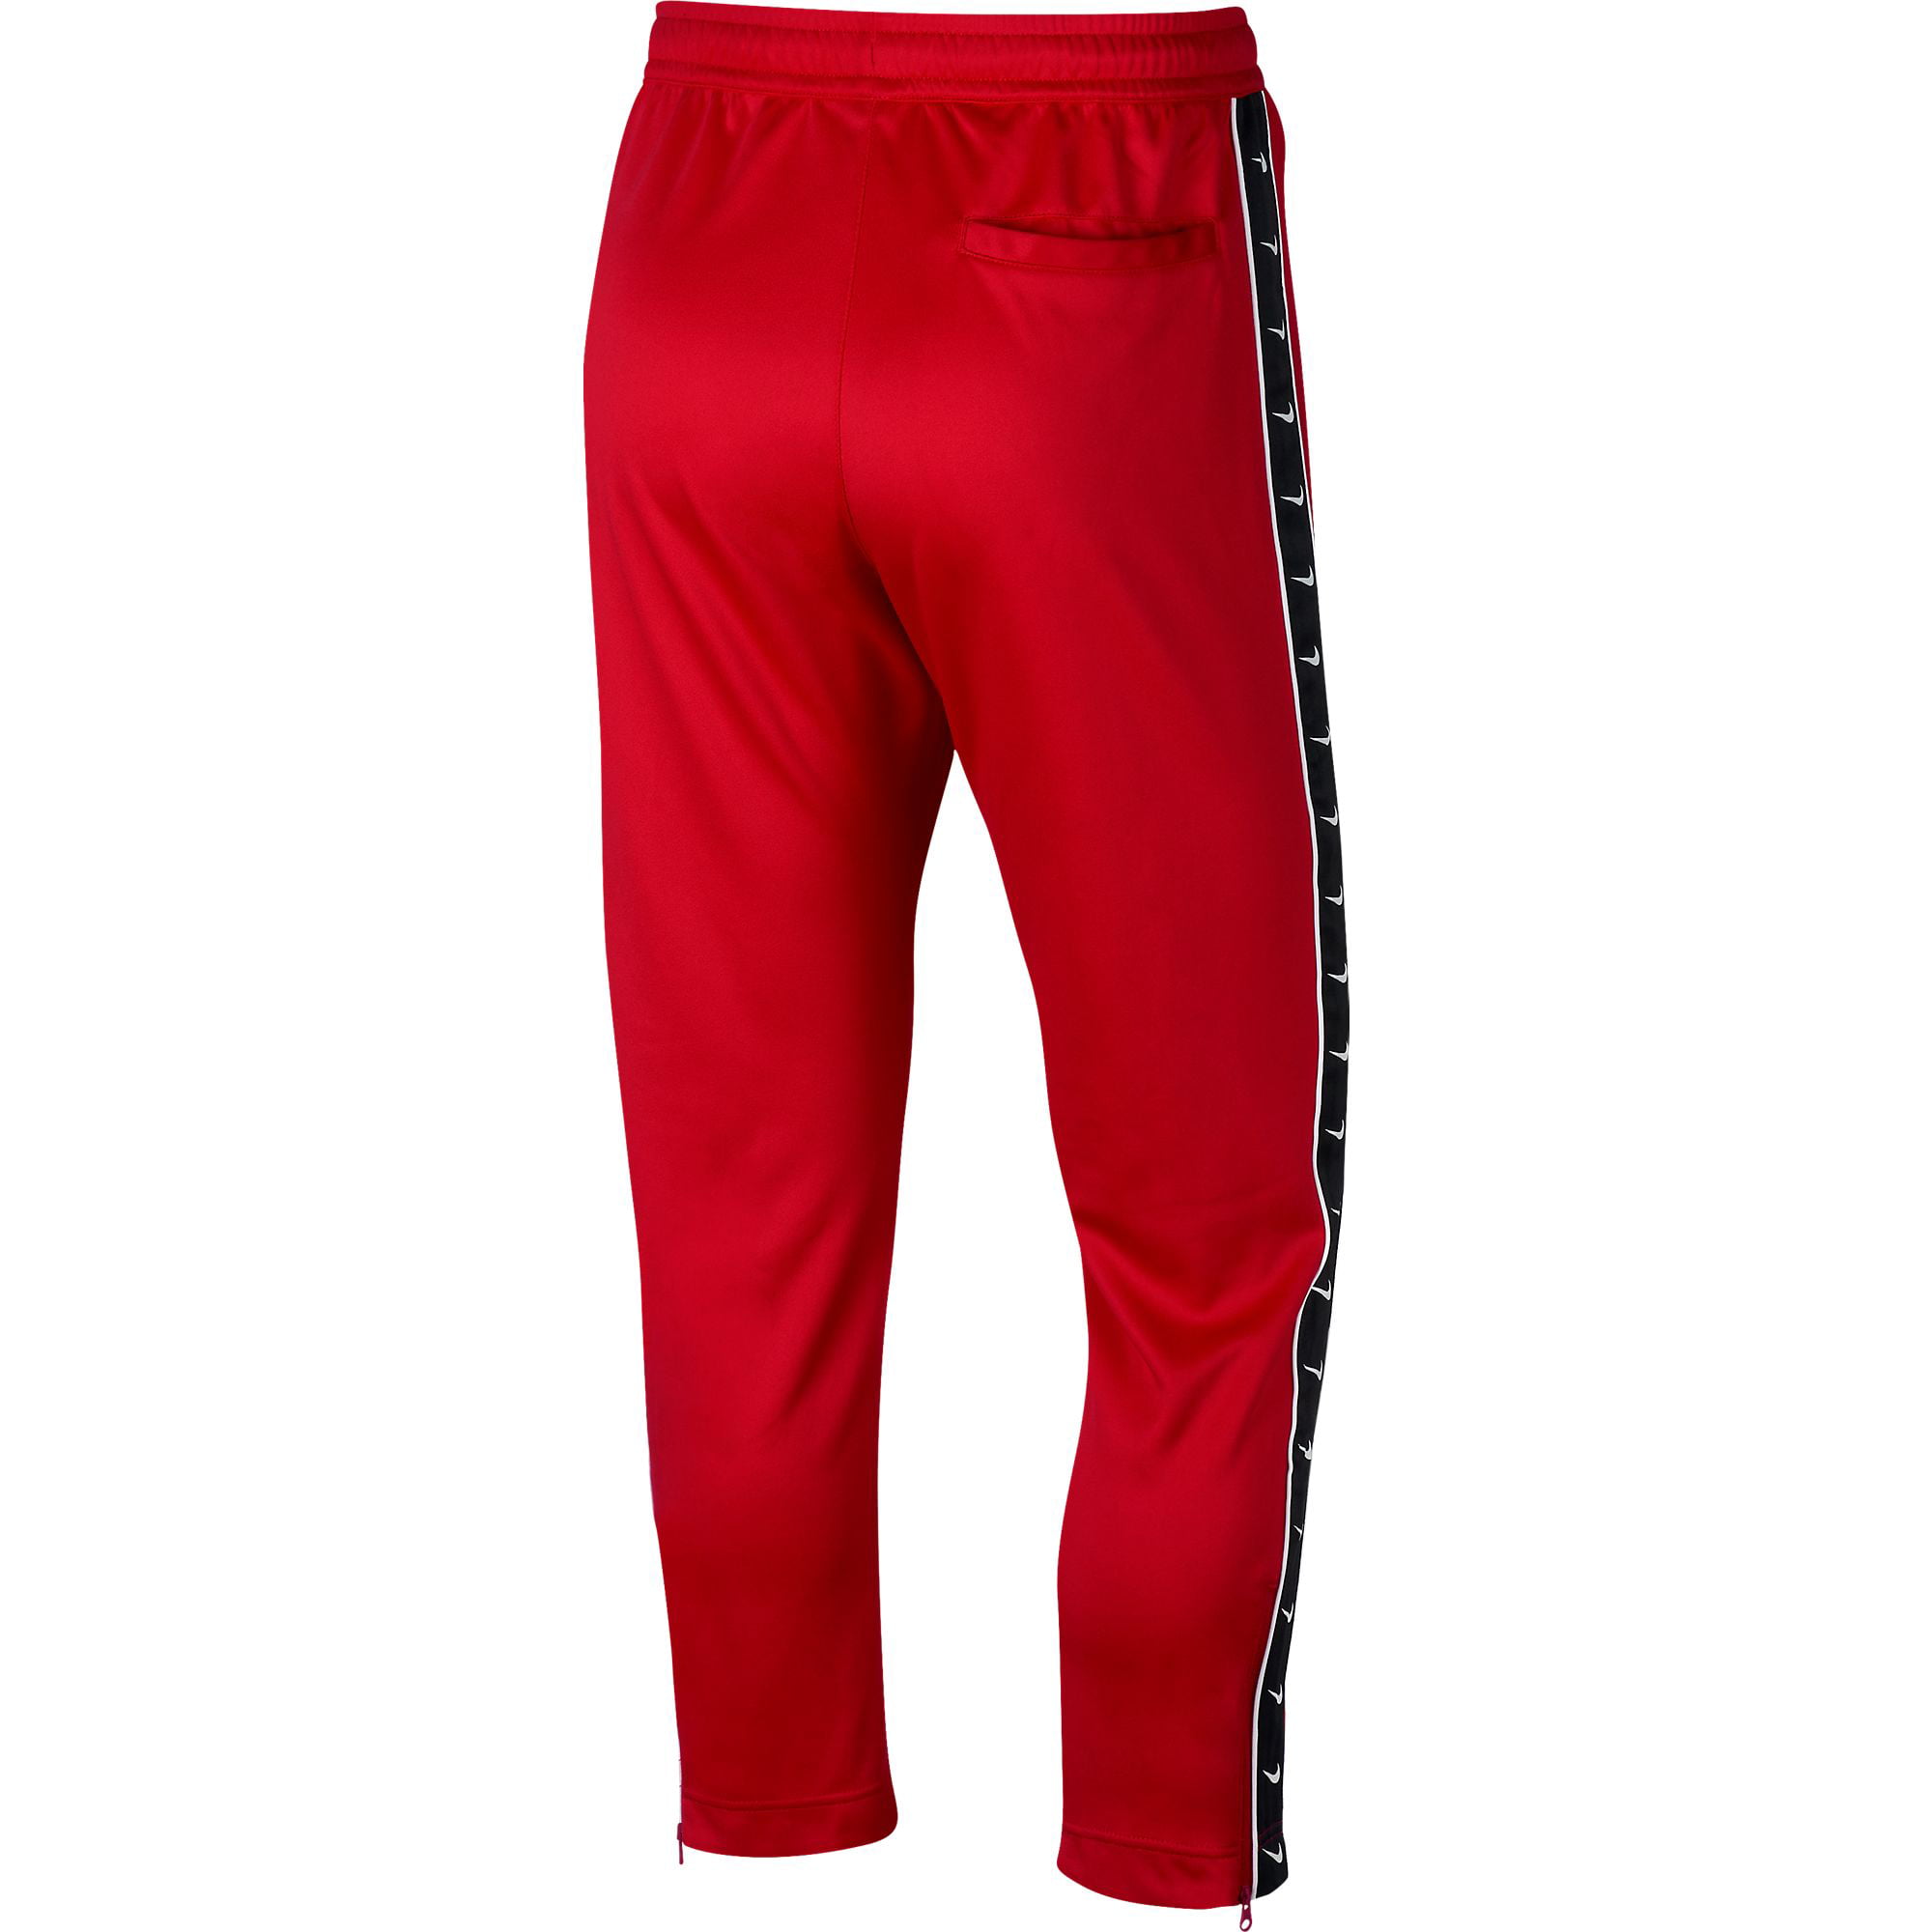 Nike HBR graphic logo sweatpants in red